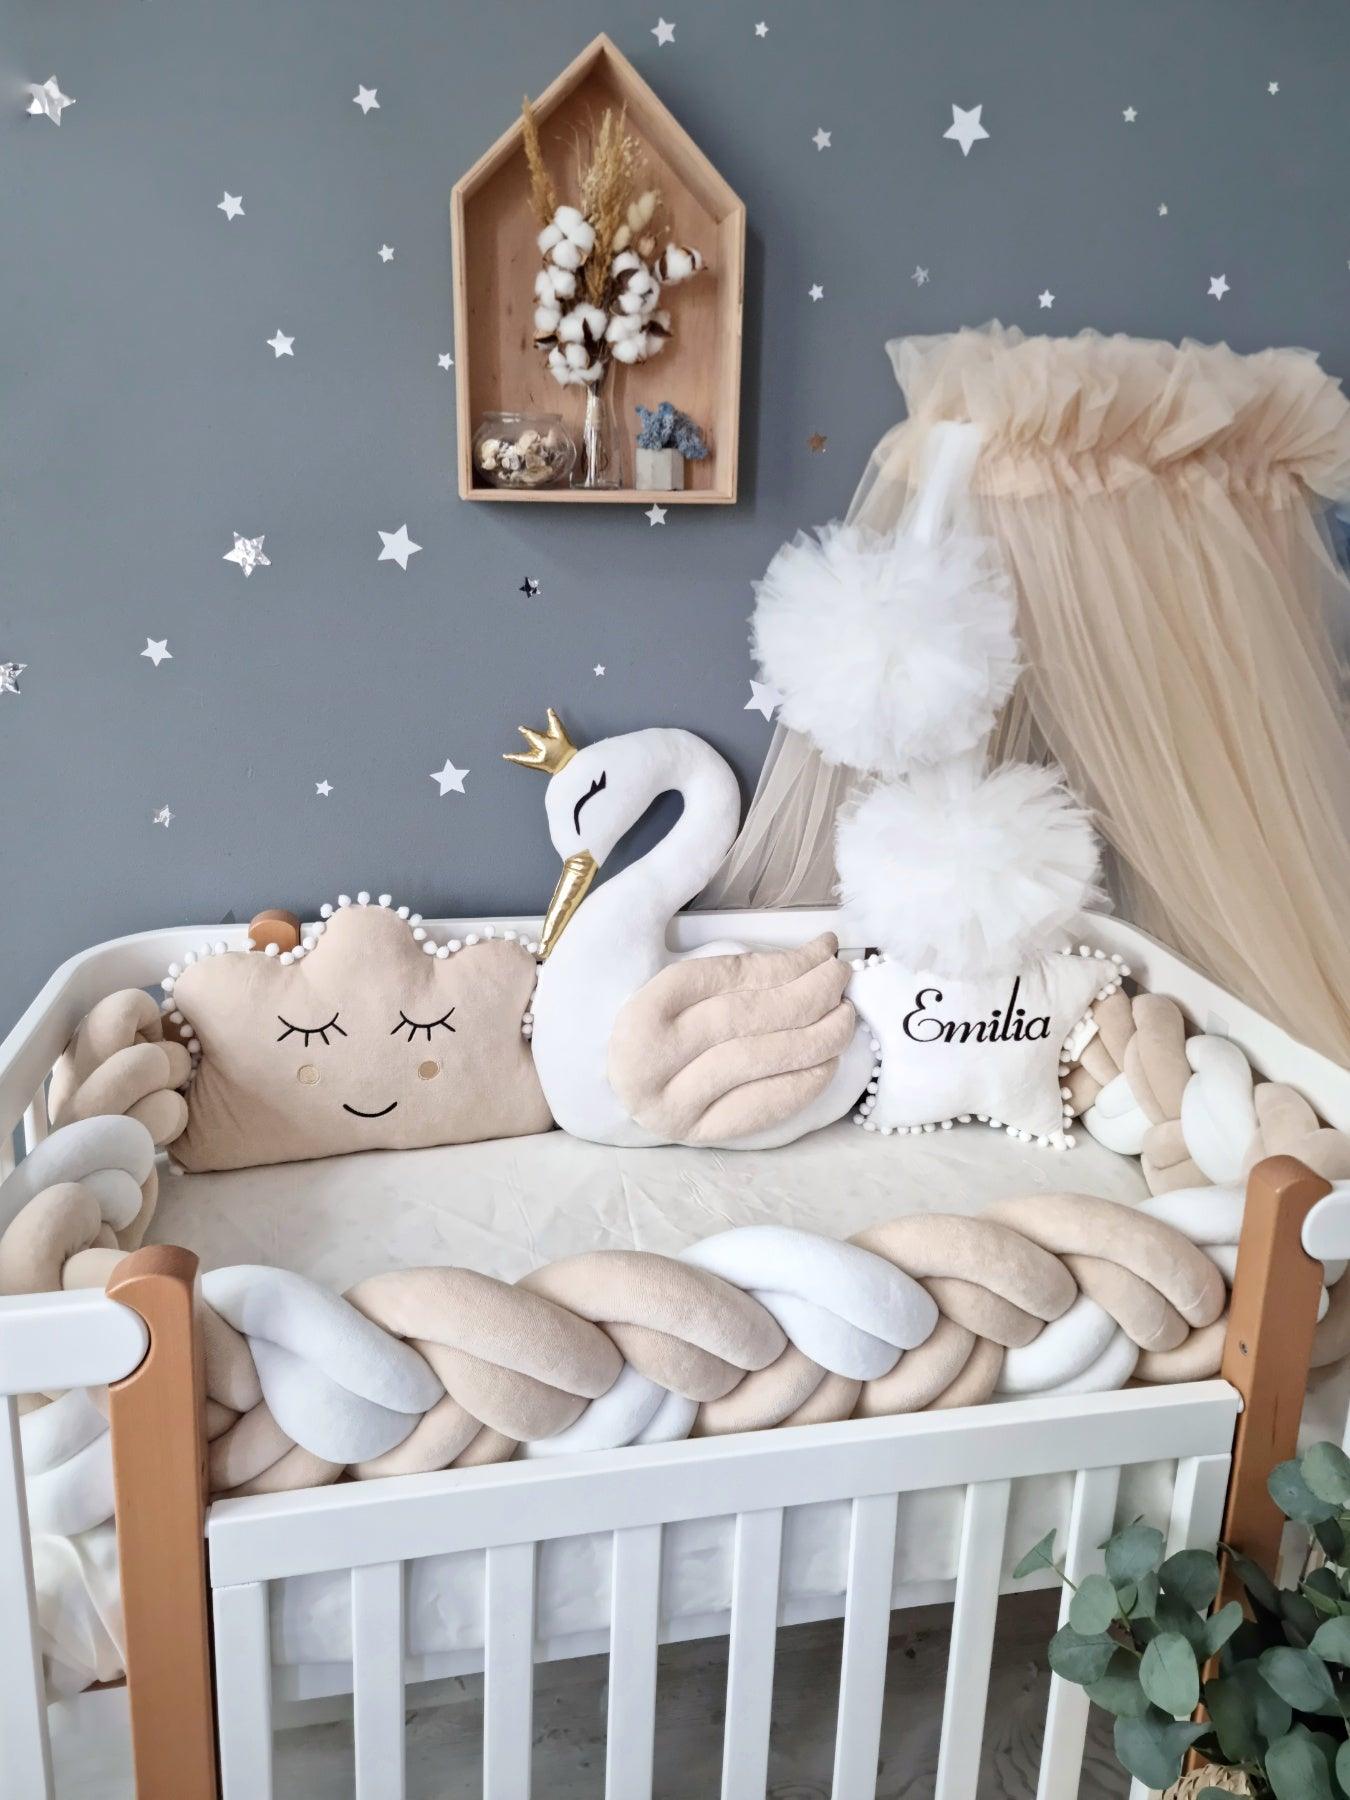 Stylish Baby Nursery: Crib Bumpers in Two Cool Fabs - Sew4Home